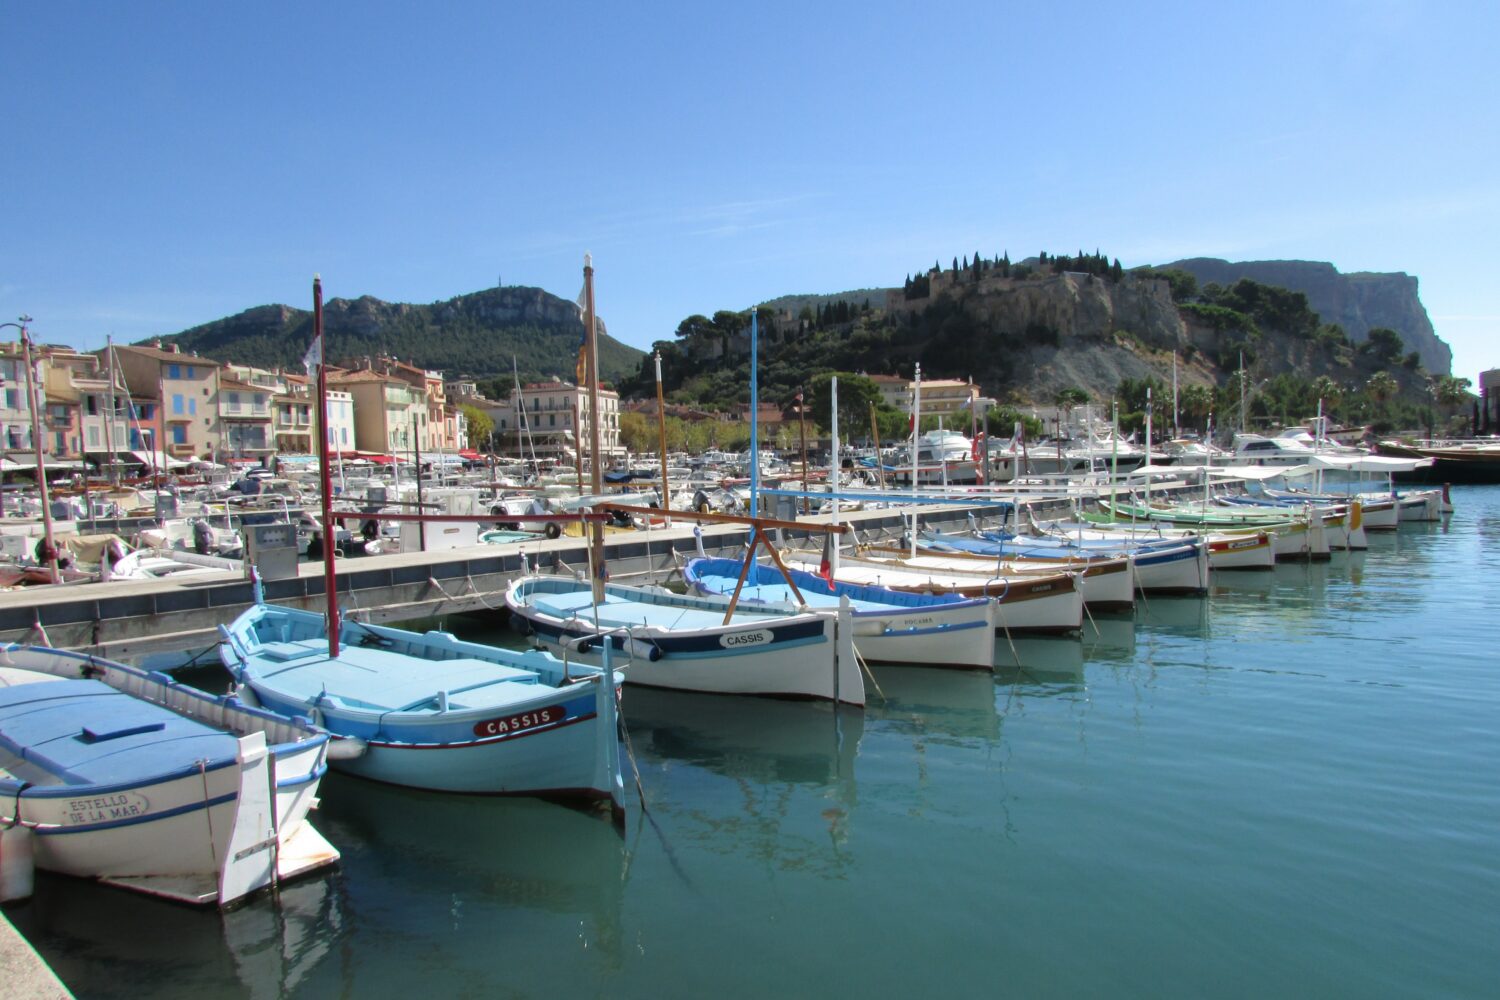 cassis boats with name of city cassis